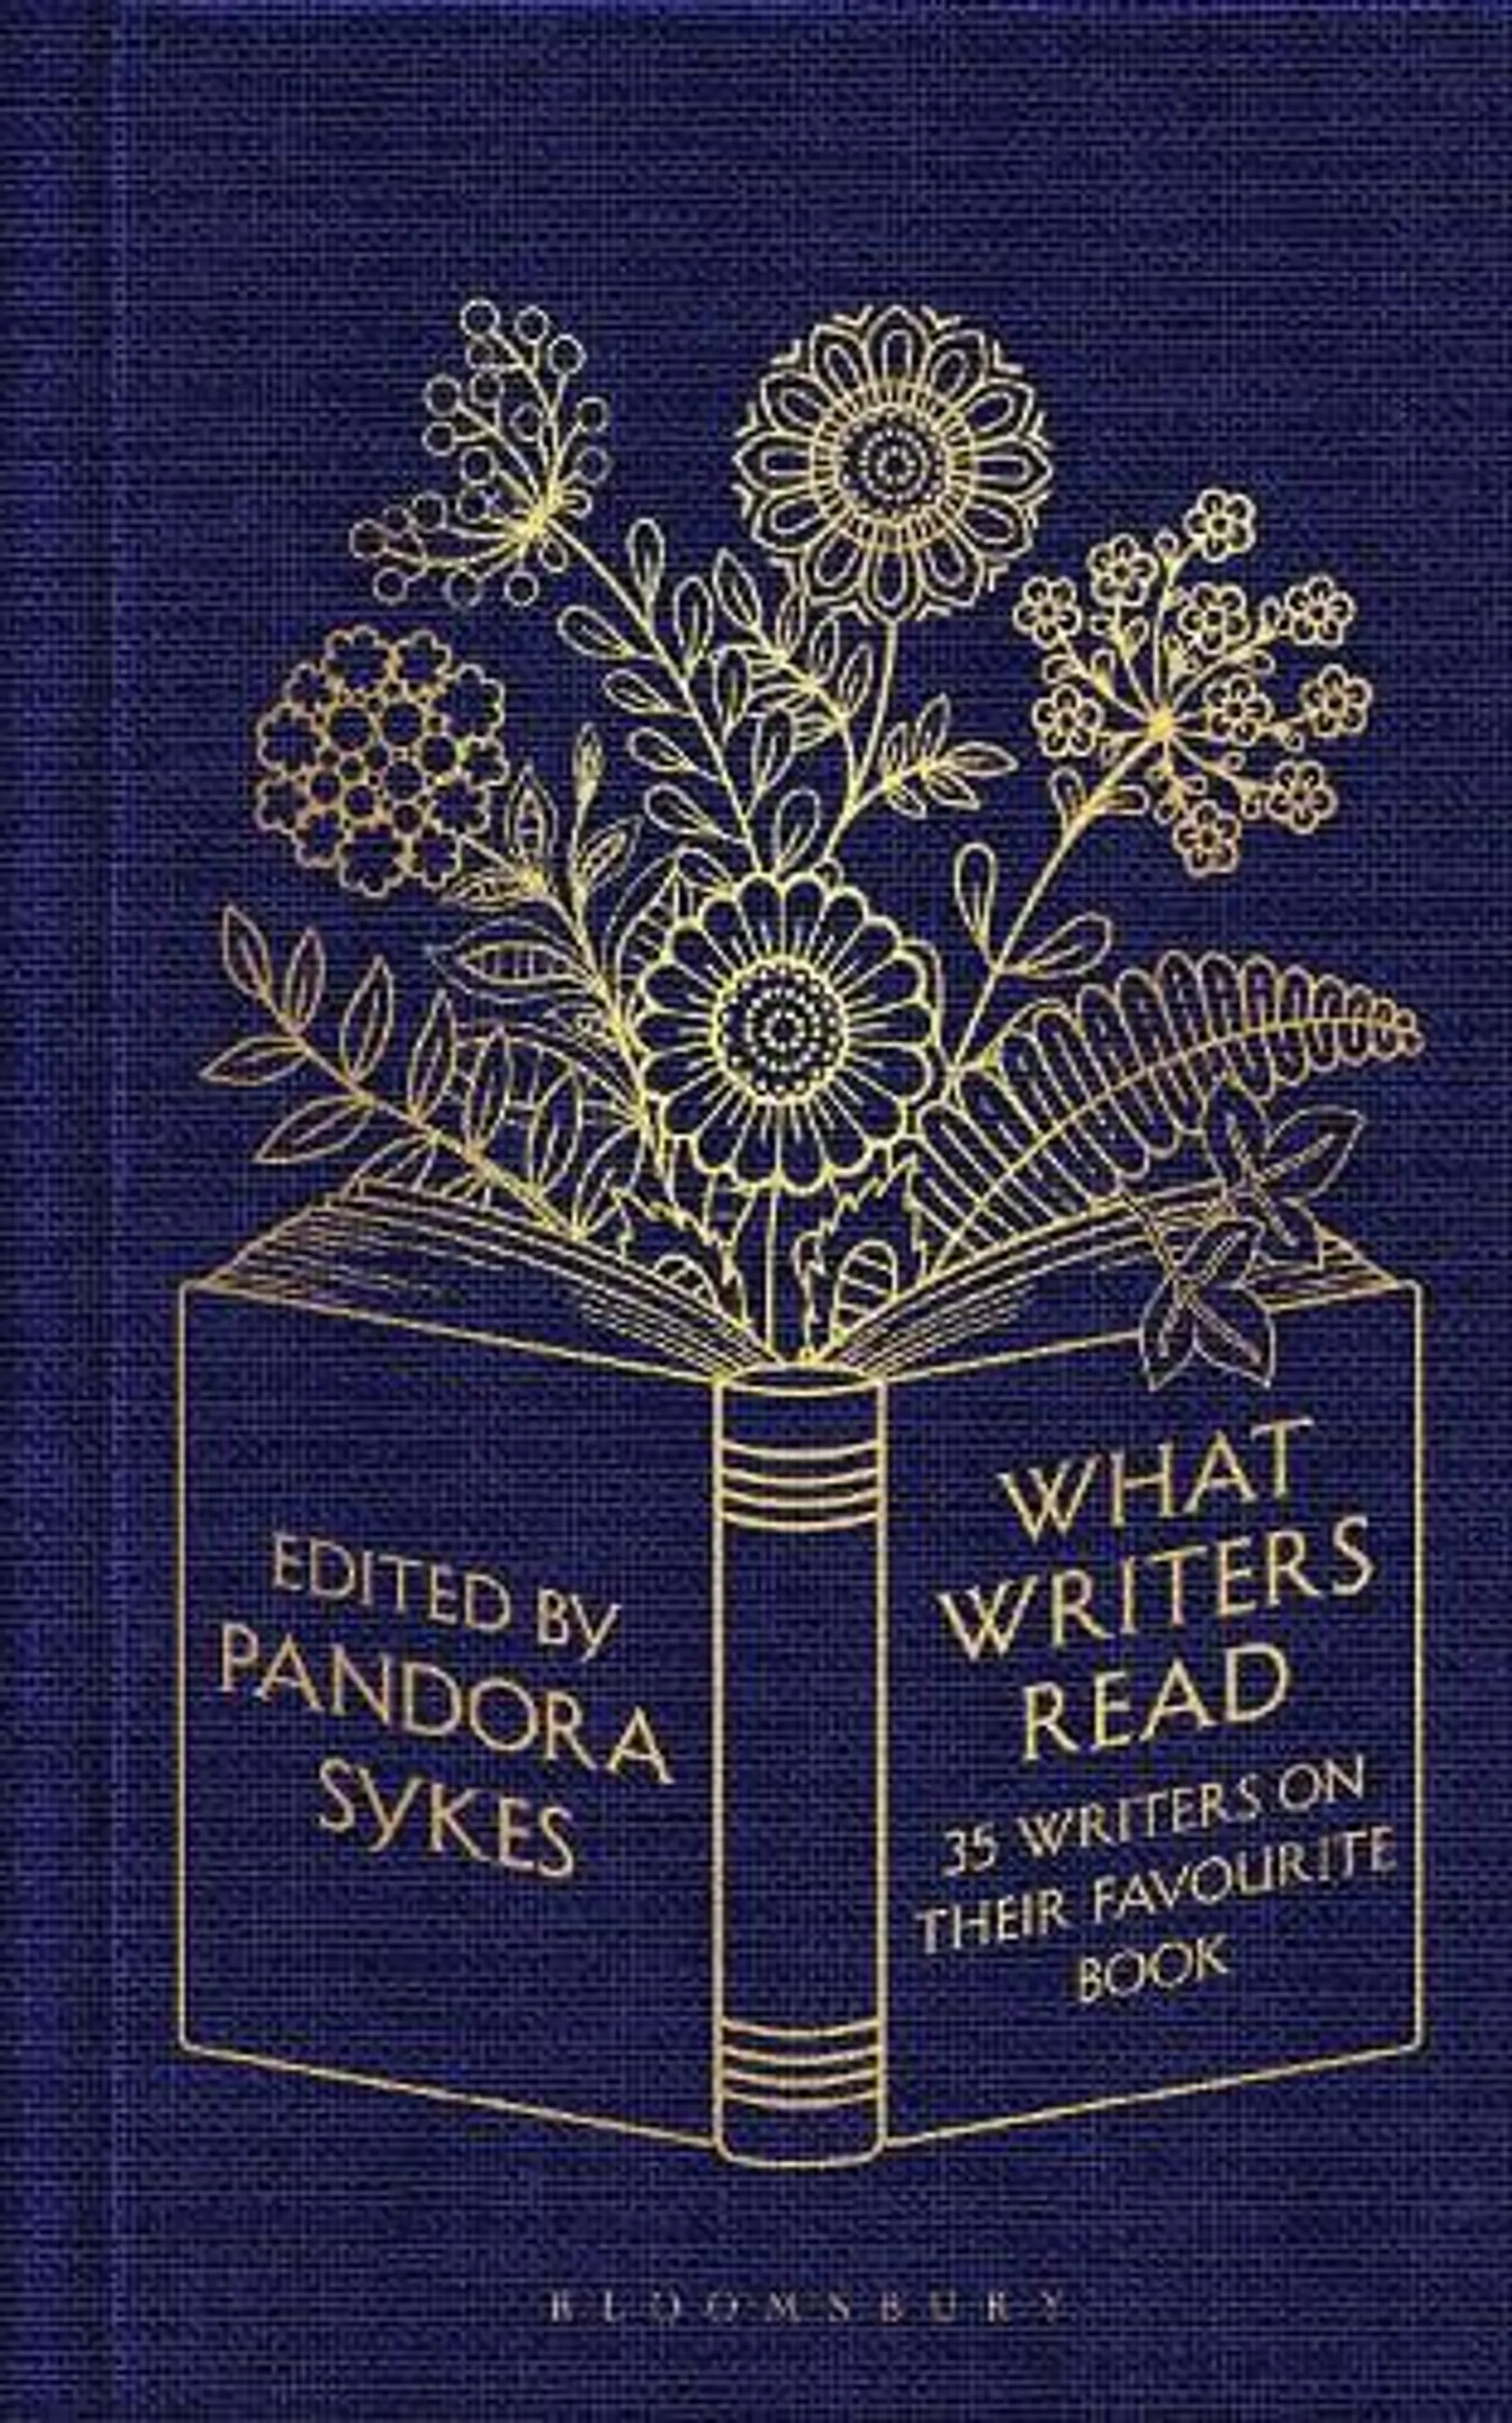 What Writers Read: 35 Writers on their Favourite Book (Hardback)